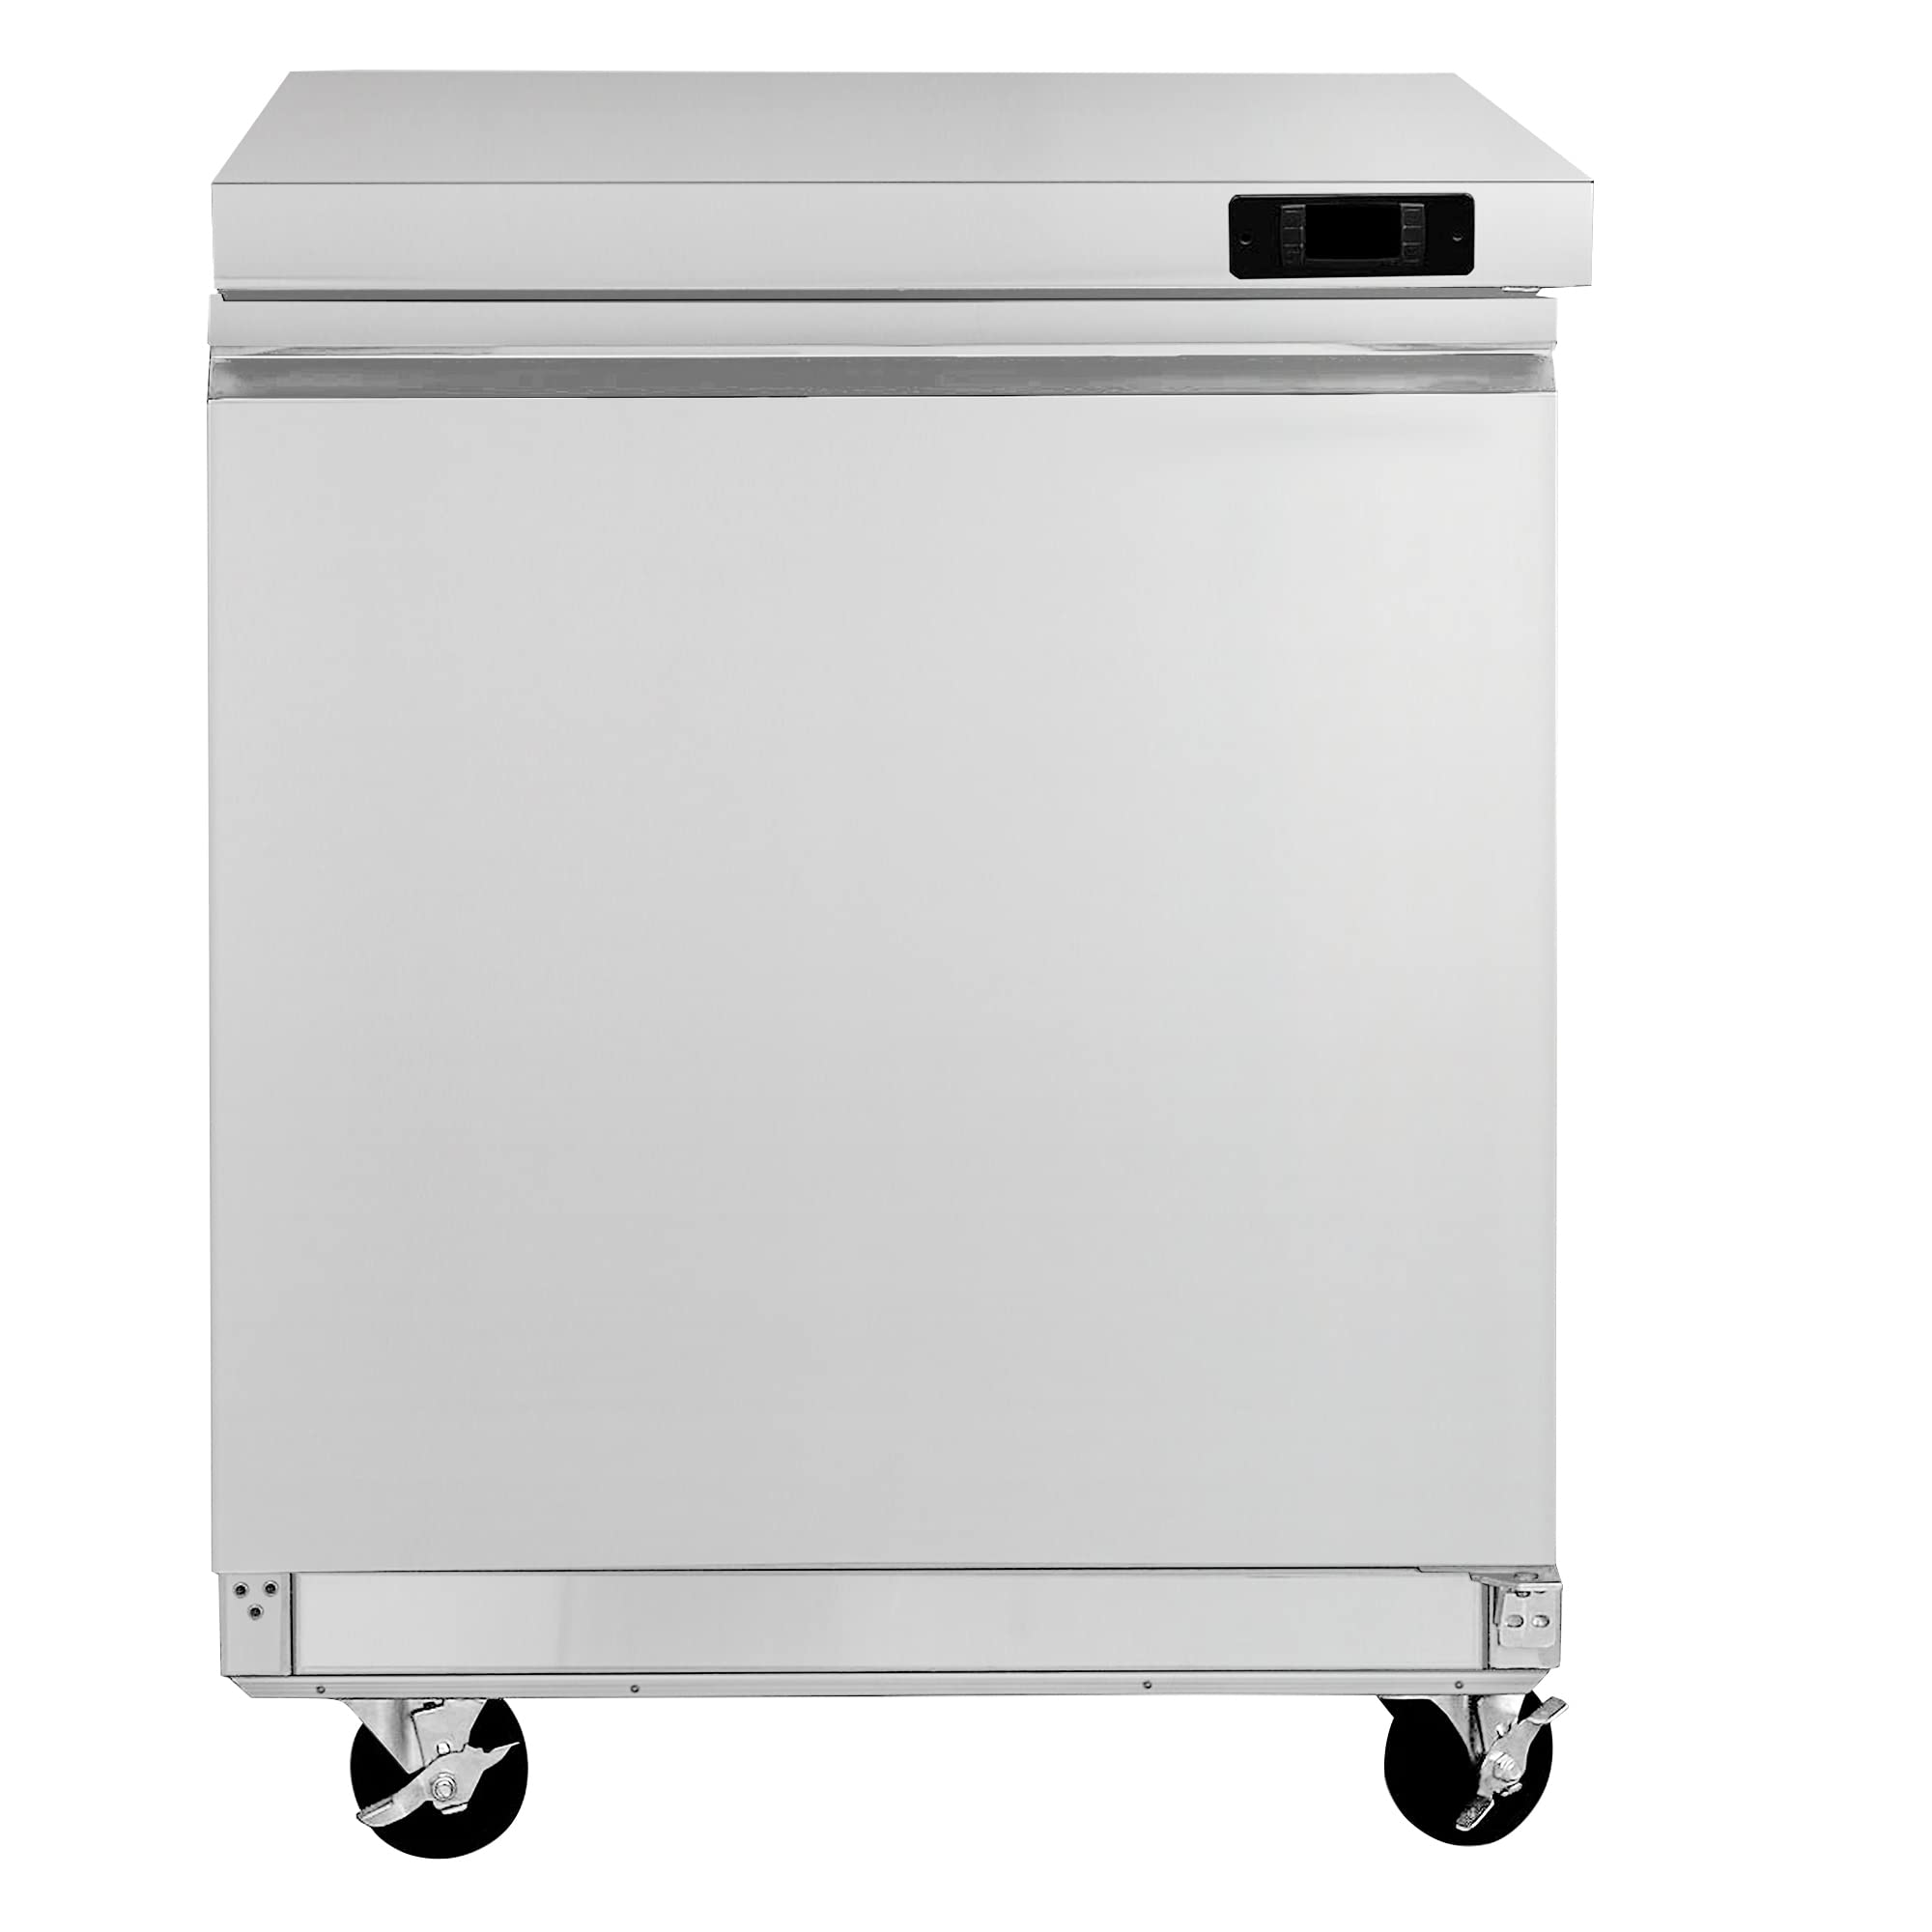 DUURA DUF29 Commercial Undercounter Freezer with Single Stainless Steel Door Swivel Casters and Epoxy Coated Wire Shelf, 6.7-Cu.Ft, Metallic